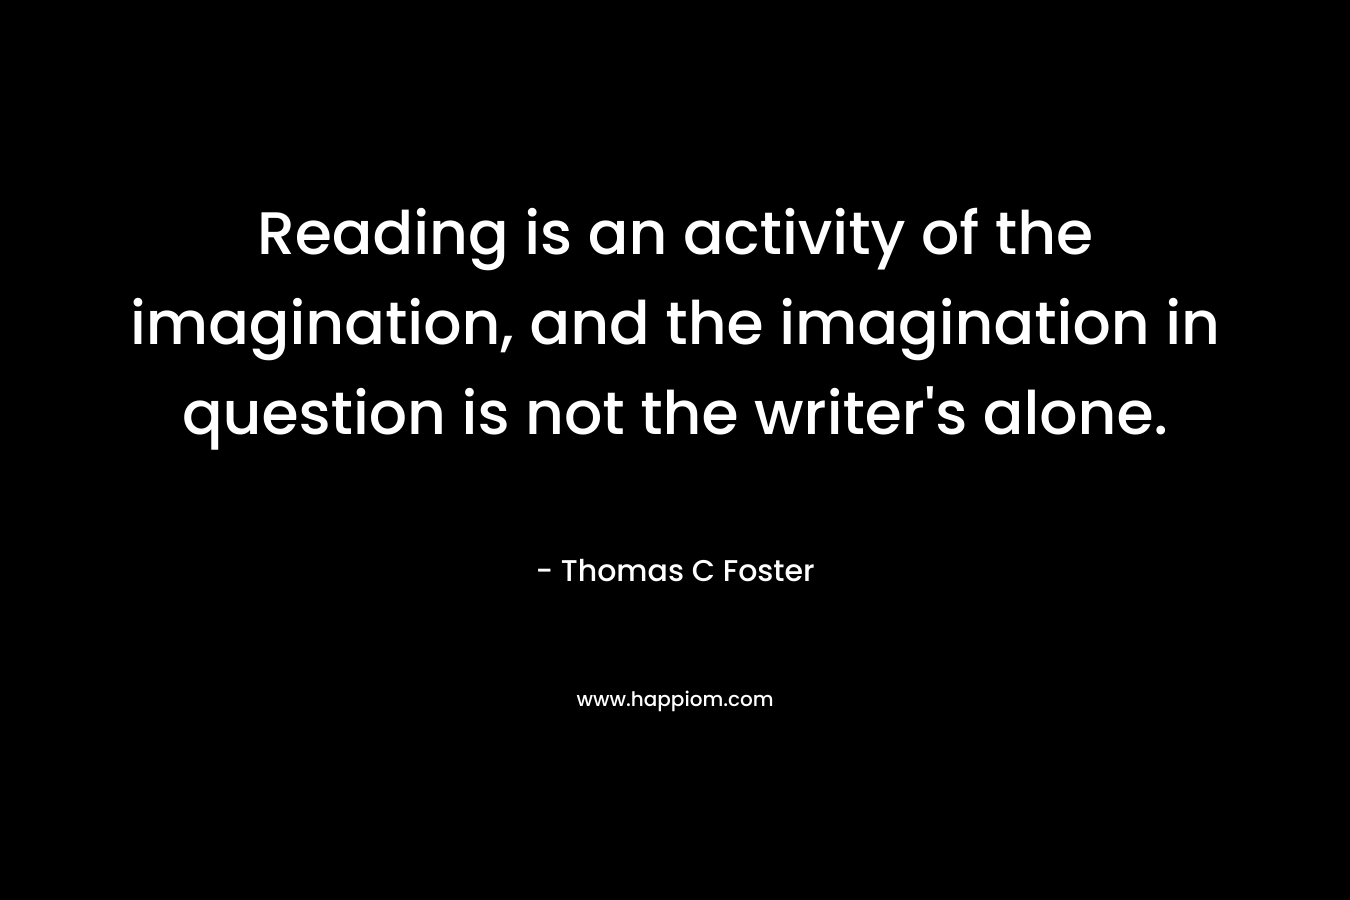 Reading is an activity of the imagination, and the imagination in question is not the writer's alone.